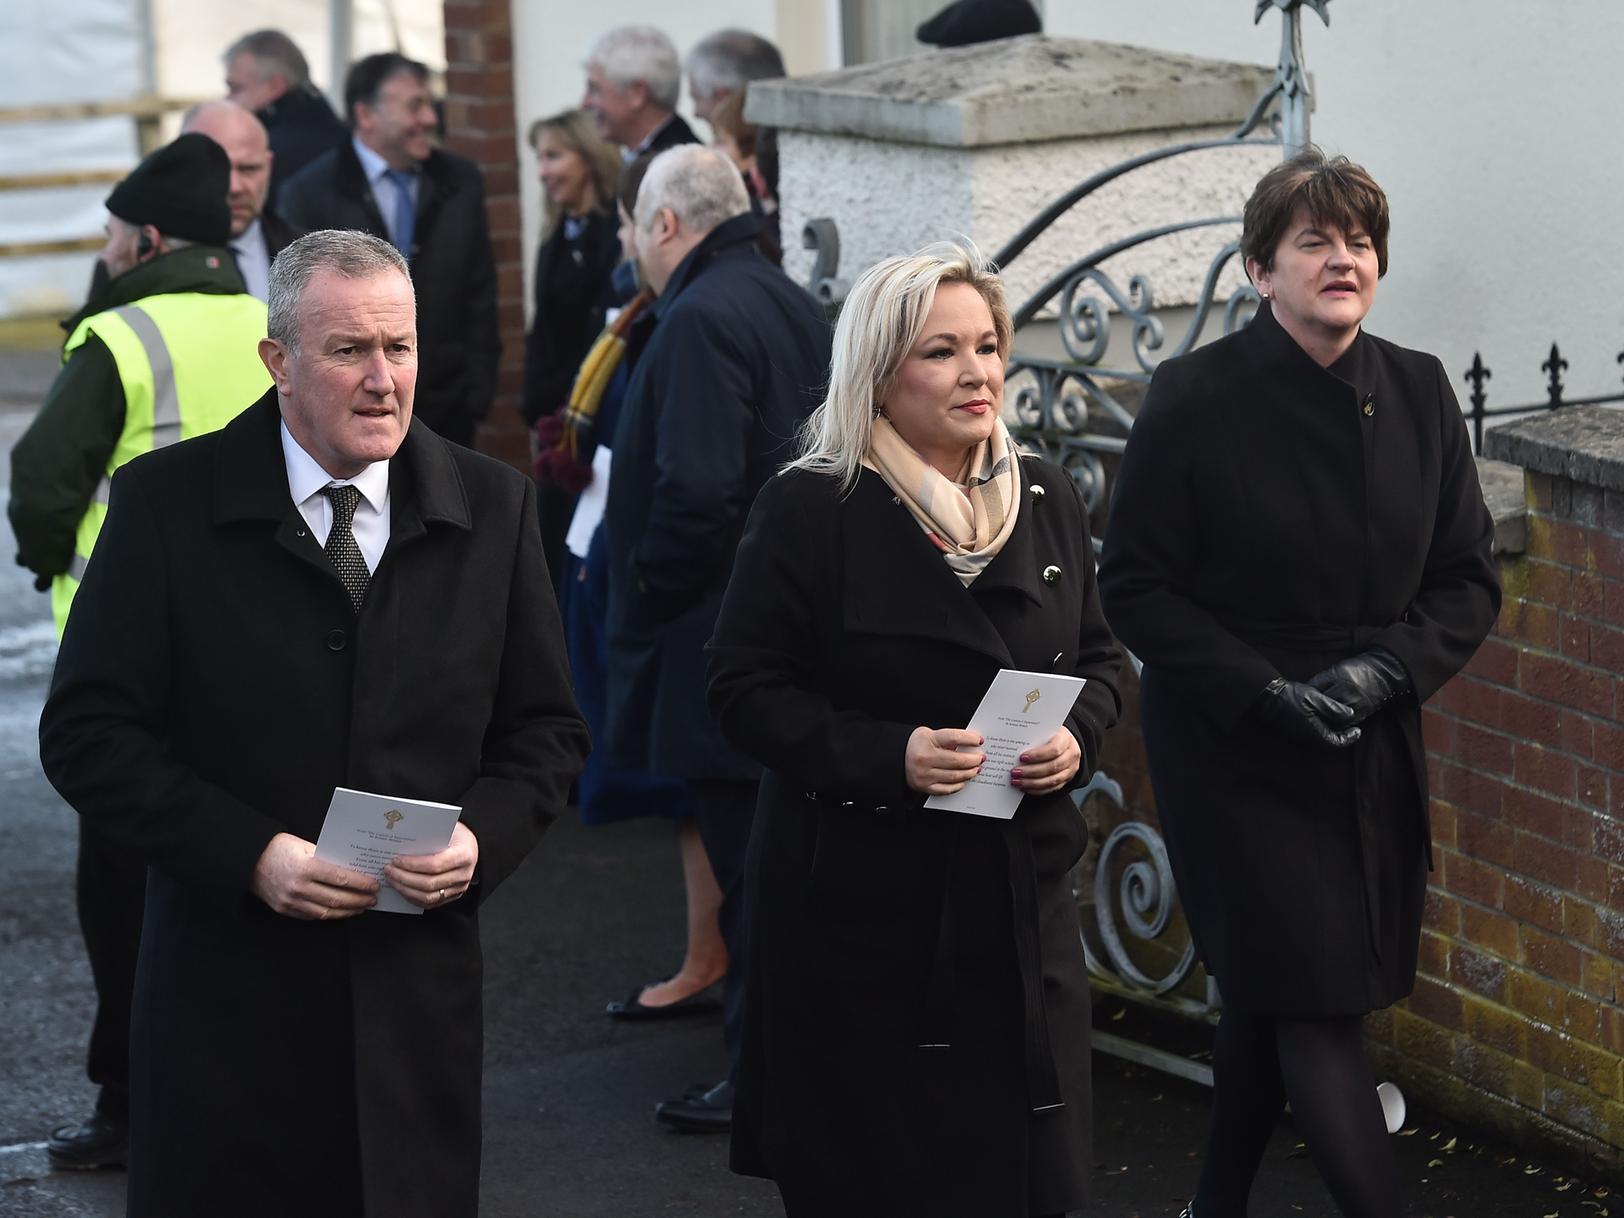 From left to right, Minister for Finance and Sinn Fein MLA for Newry and Armagh, Conor Murphy; deputy First Minister, Michelle O'Neill and First Minister, Arlene Foster.